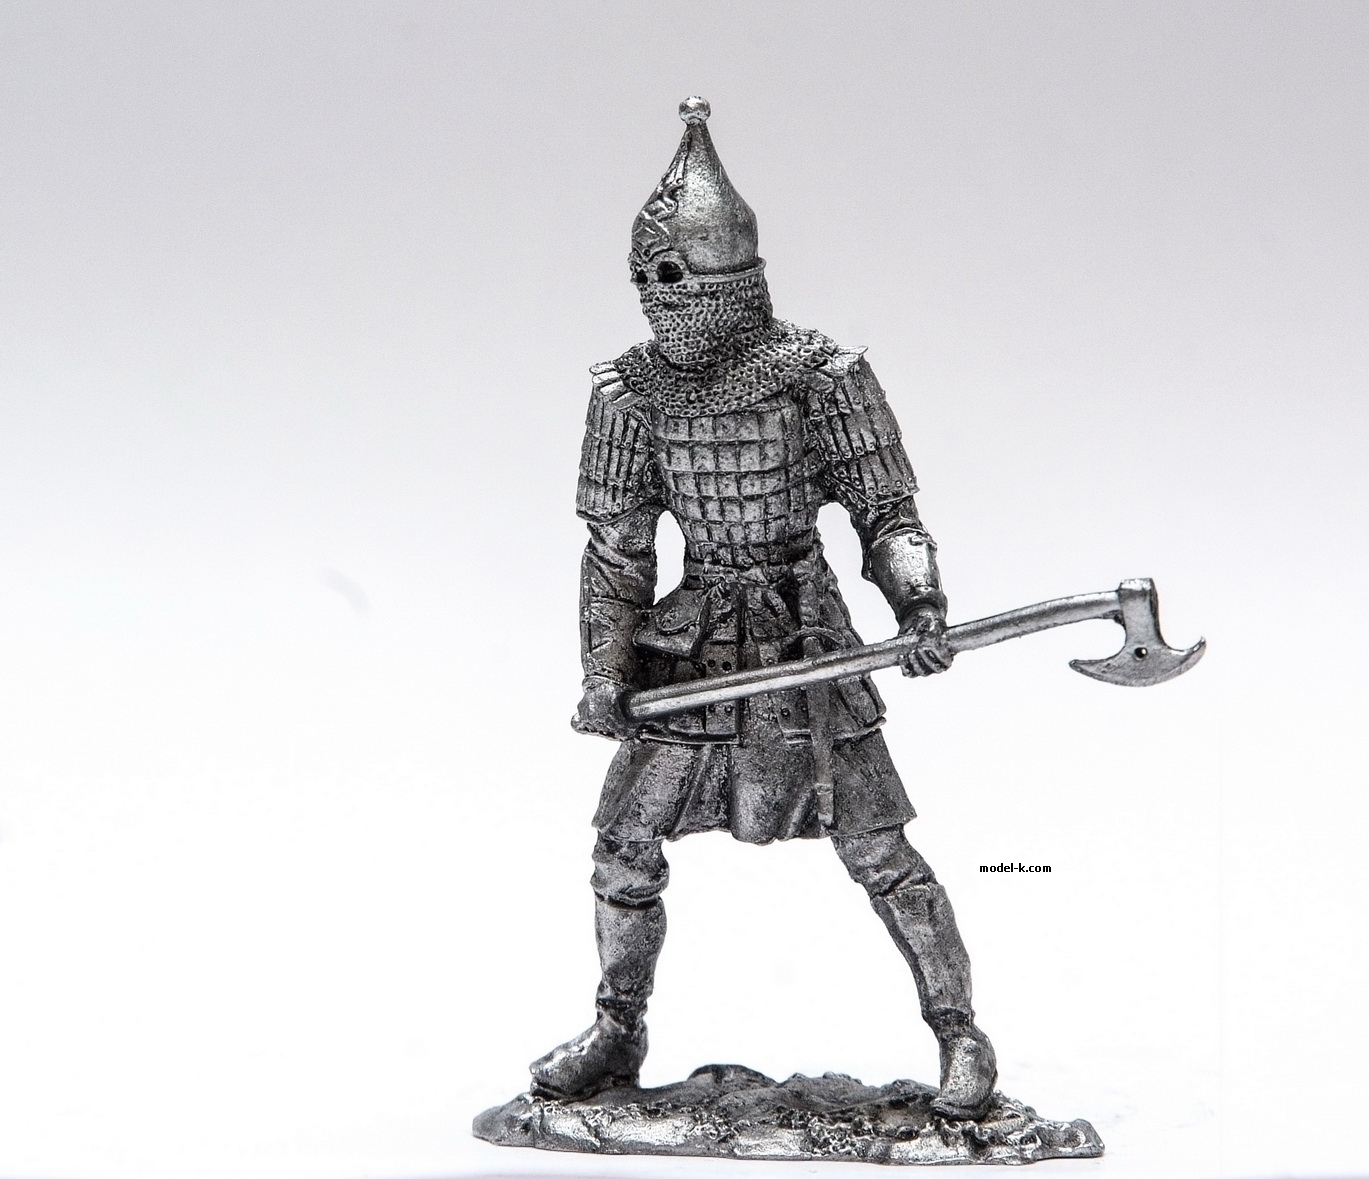 tin 54mm VR56 Heave Armored Ruthenian Warrior 14th c 1:32 scale metal sculpture 